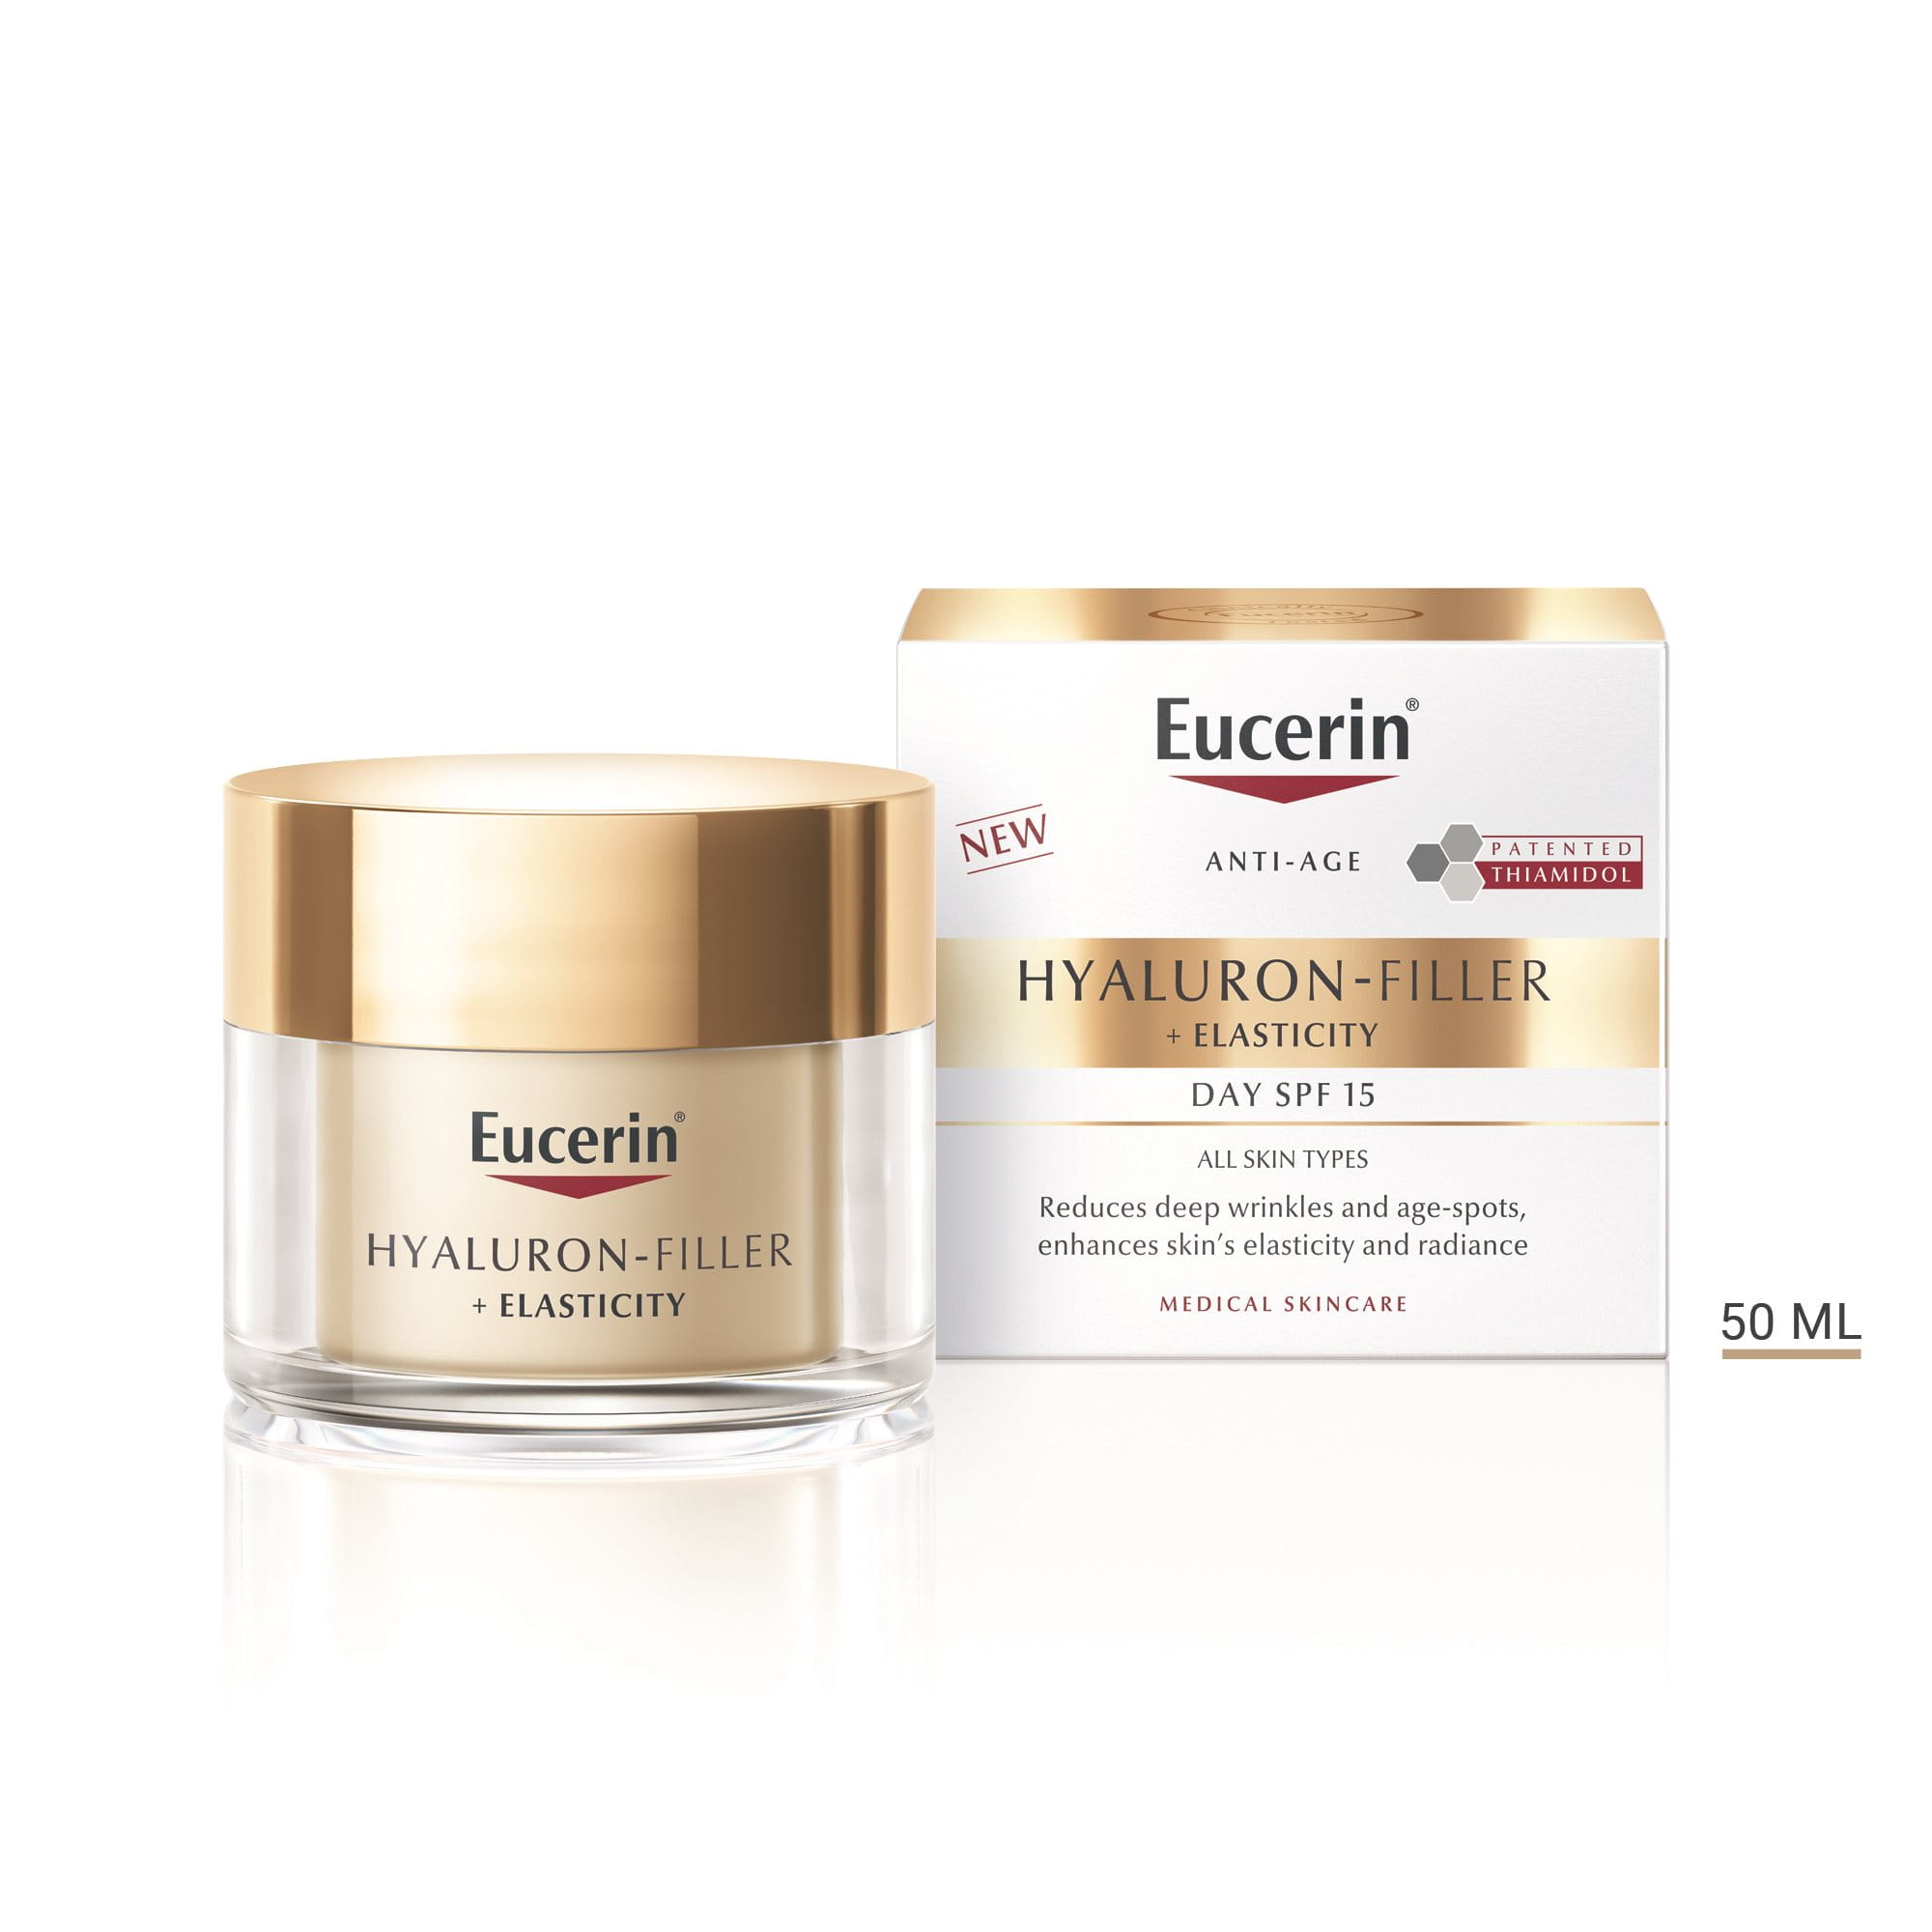 Eucerin Hyaluron-Filler + Elasticity Day Cream SPF15 with patented Thiamidol 